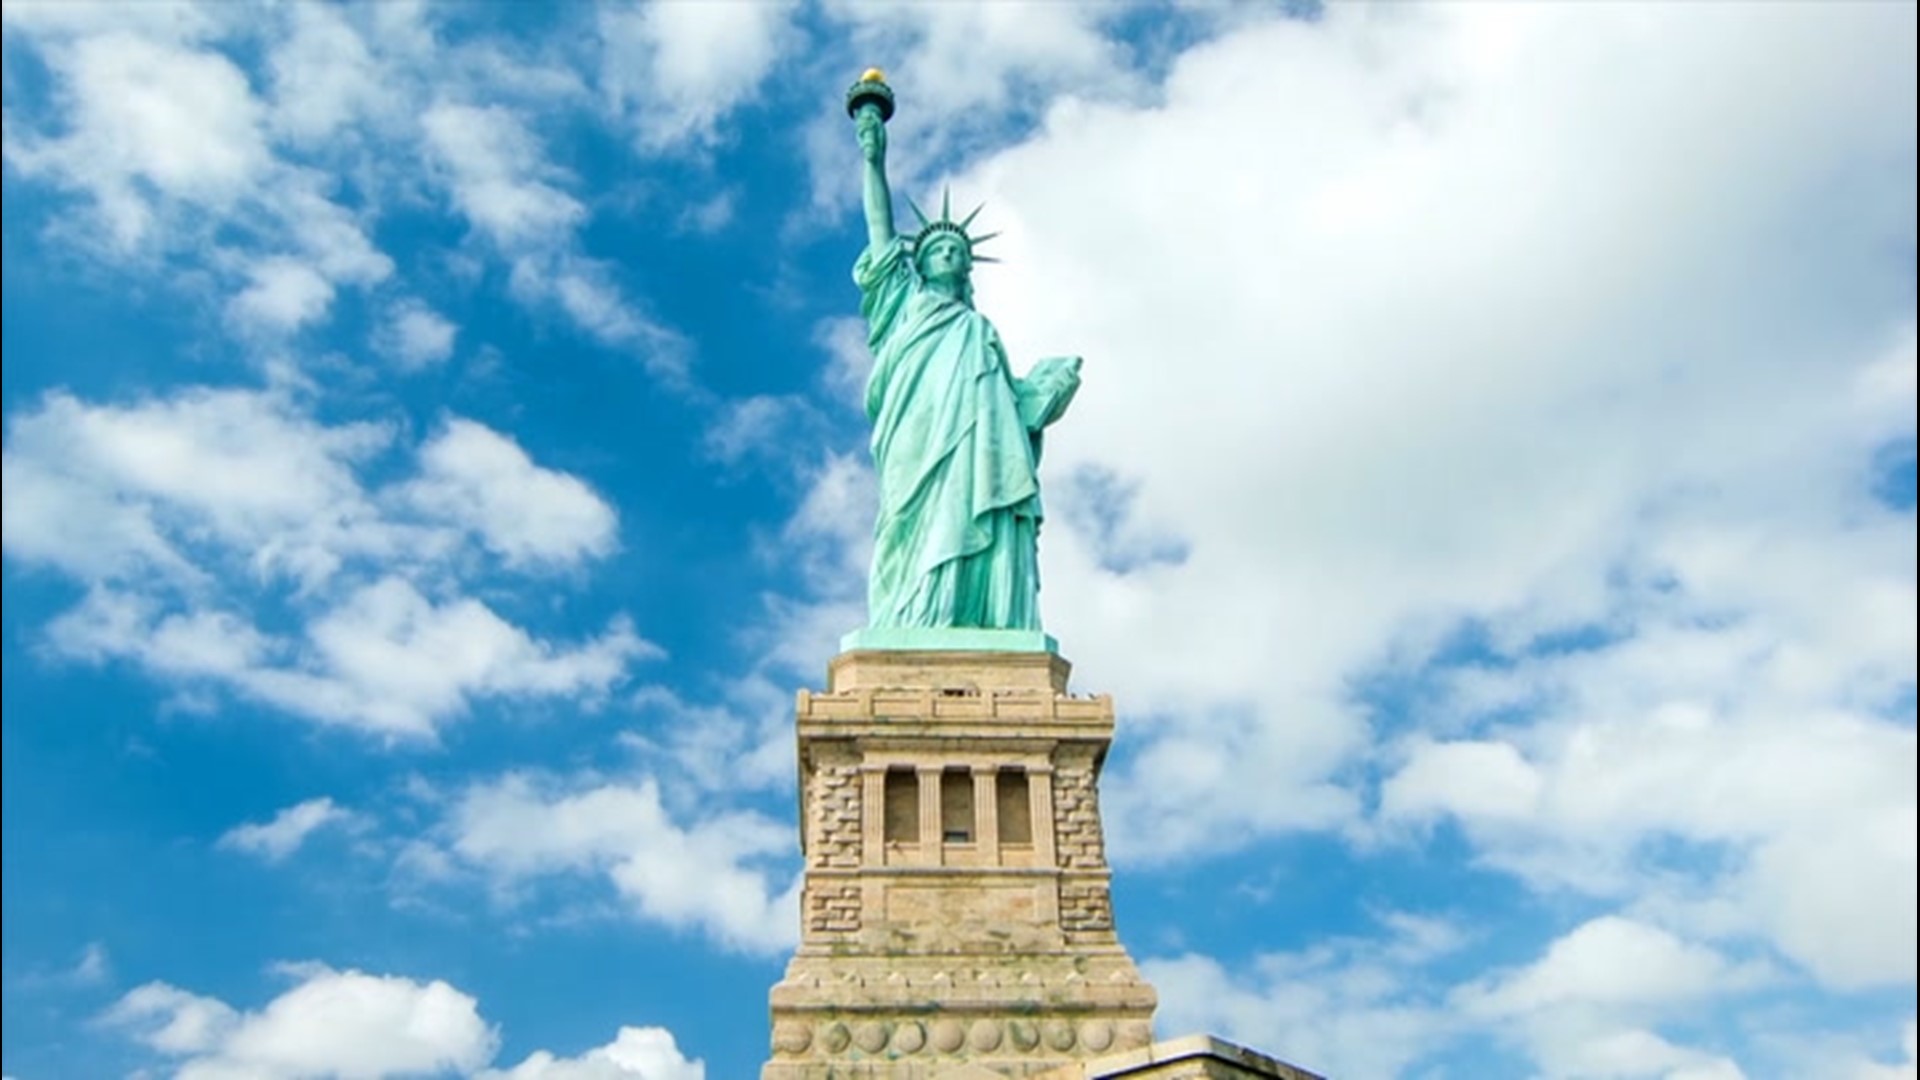 France gives the Statue of Liberty to the United States | July 4, 1884 |  HISTORY